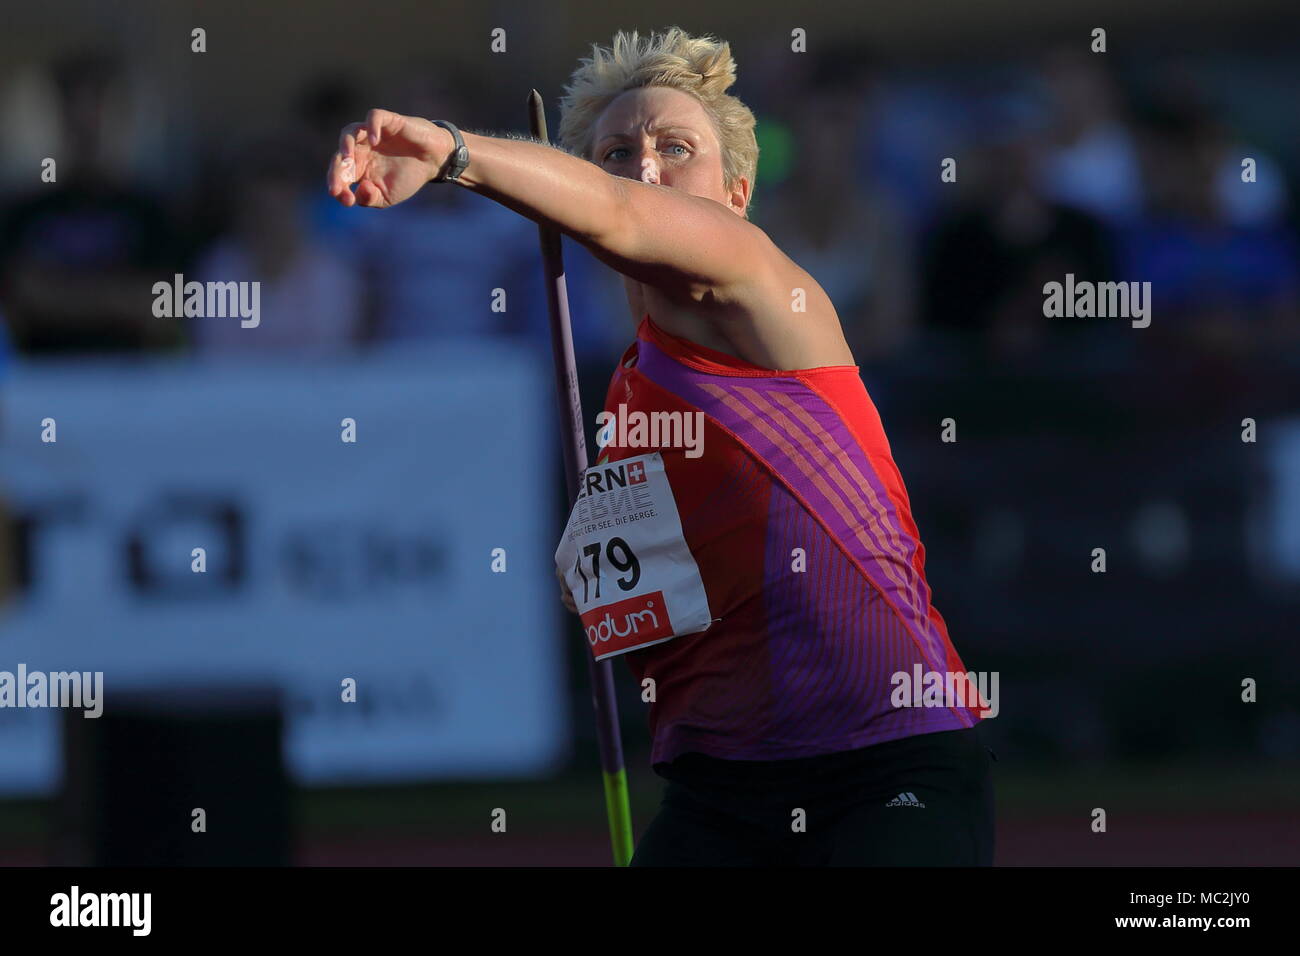 Lucerne, Switzerland. 17th, Jul 2012.  Christina Obergfoll of Germany in action during the Women's Javelin Throw event of the Meeting athletics compet Stock Photo